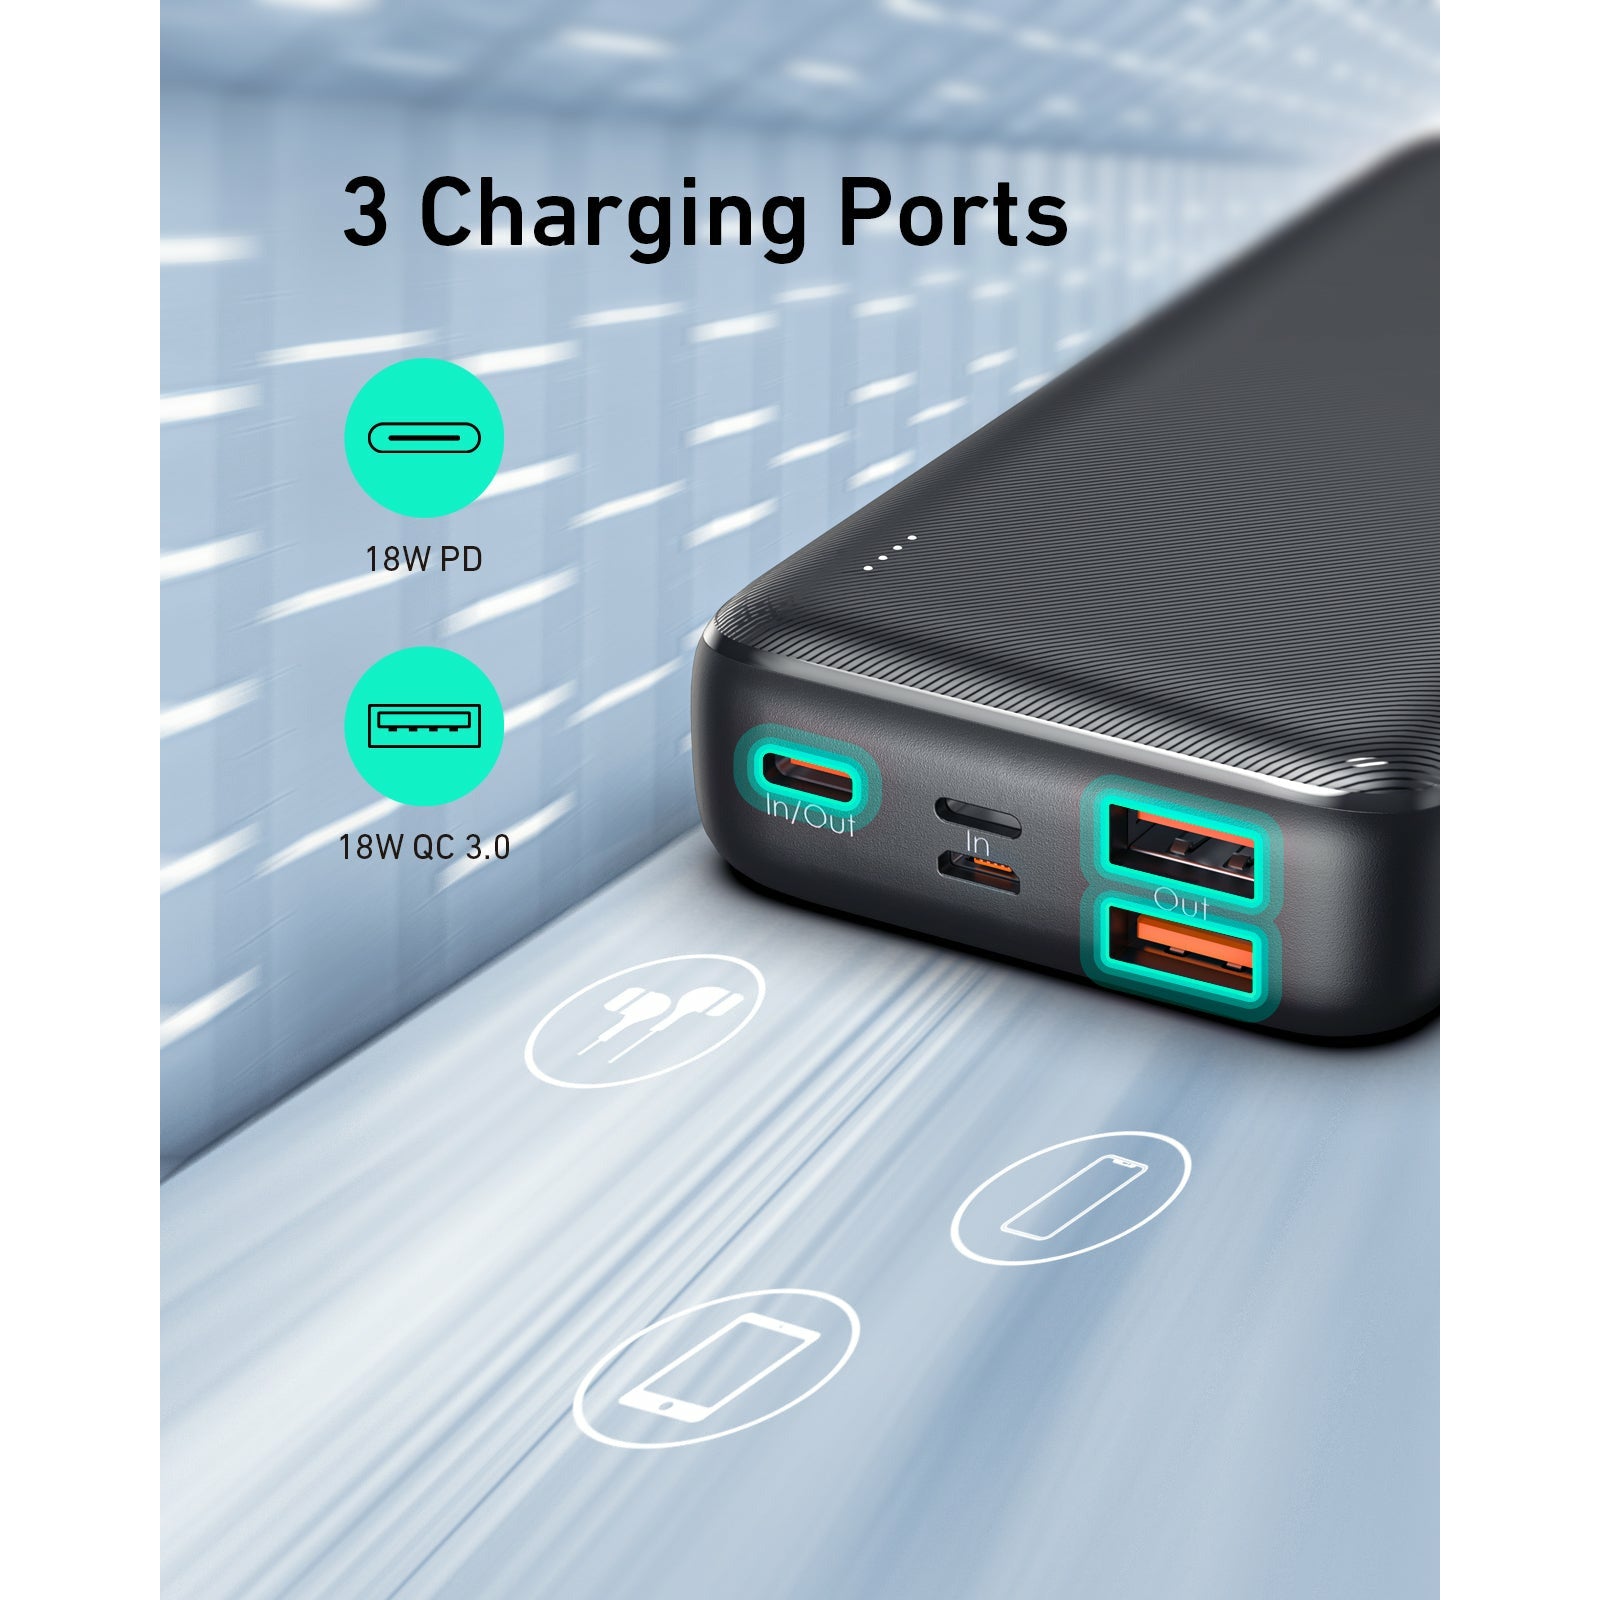 AUKEY PB-N74S Basix Plus 20000mAh Power Delivery Power Bank